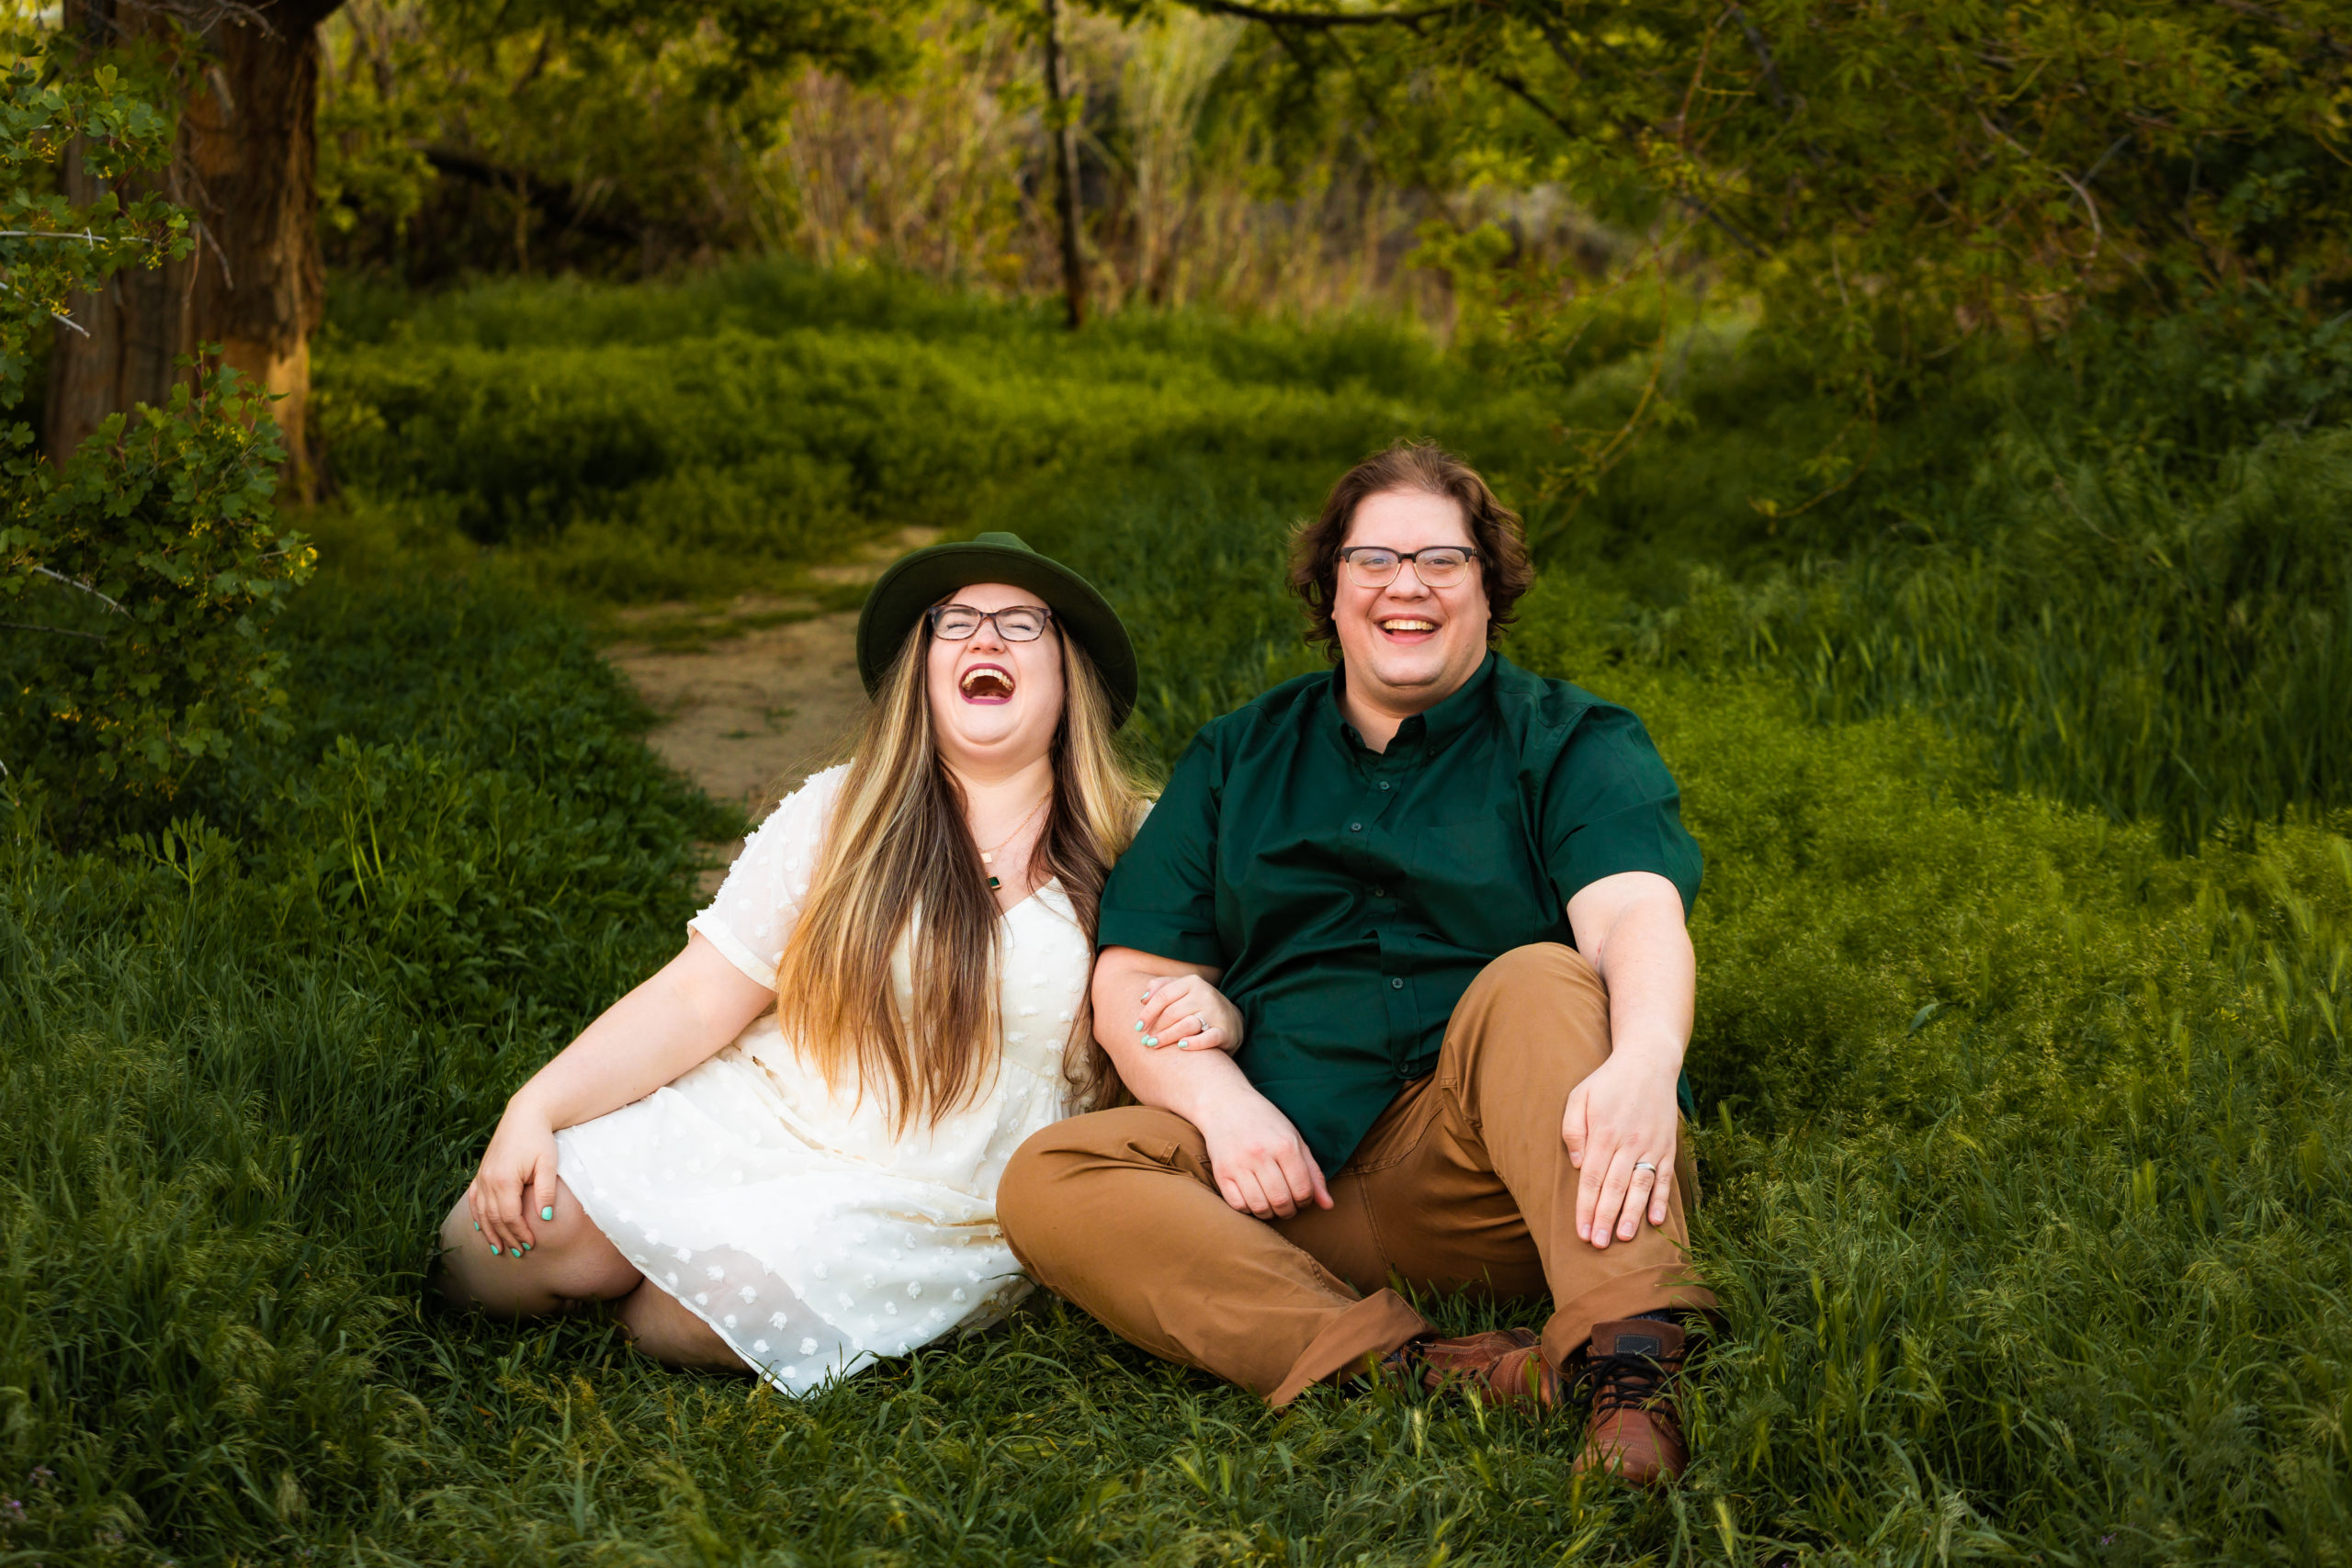 newly engaged couple sitting in grass laughing together